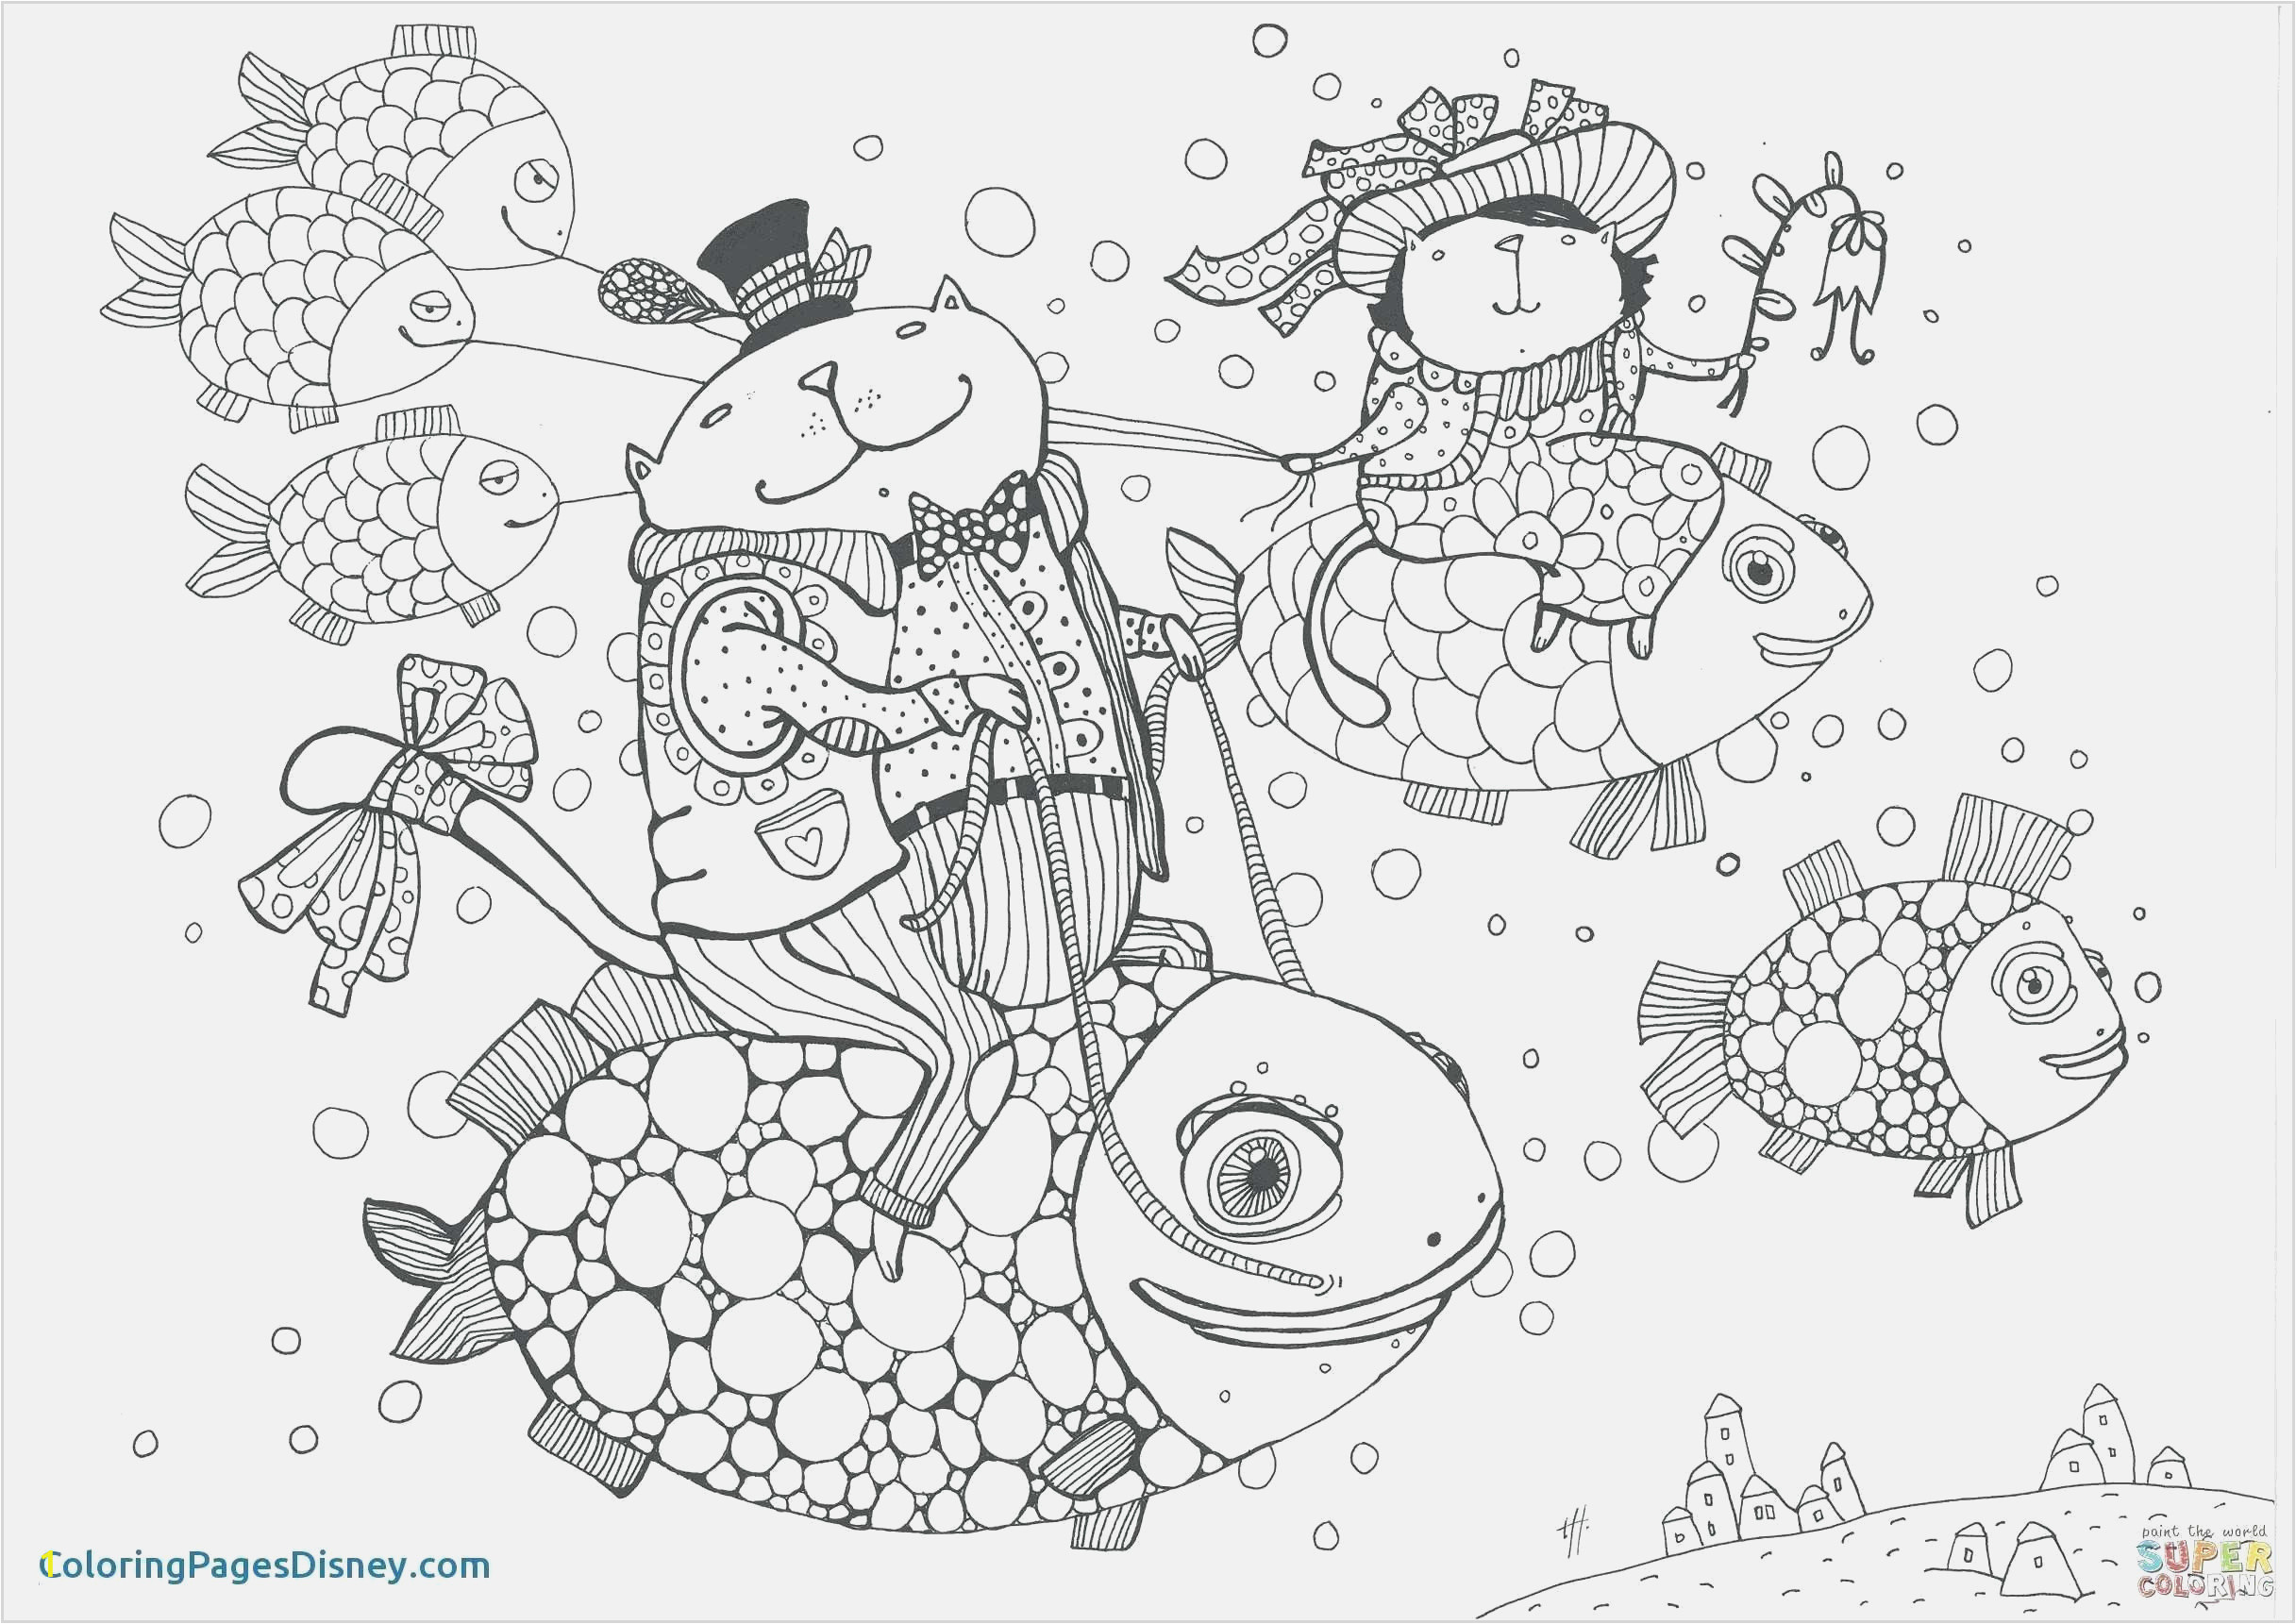 Beyblade Printable Coloring Pages Poppy Coloring Pages Print at Coloring Pages